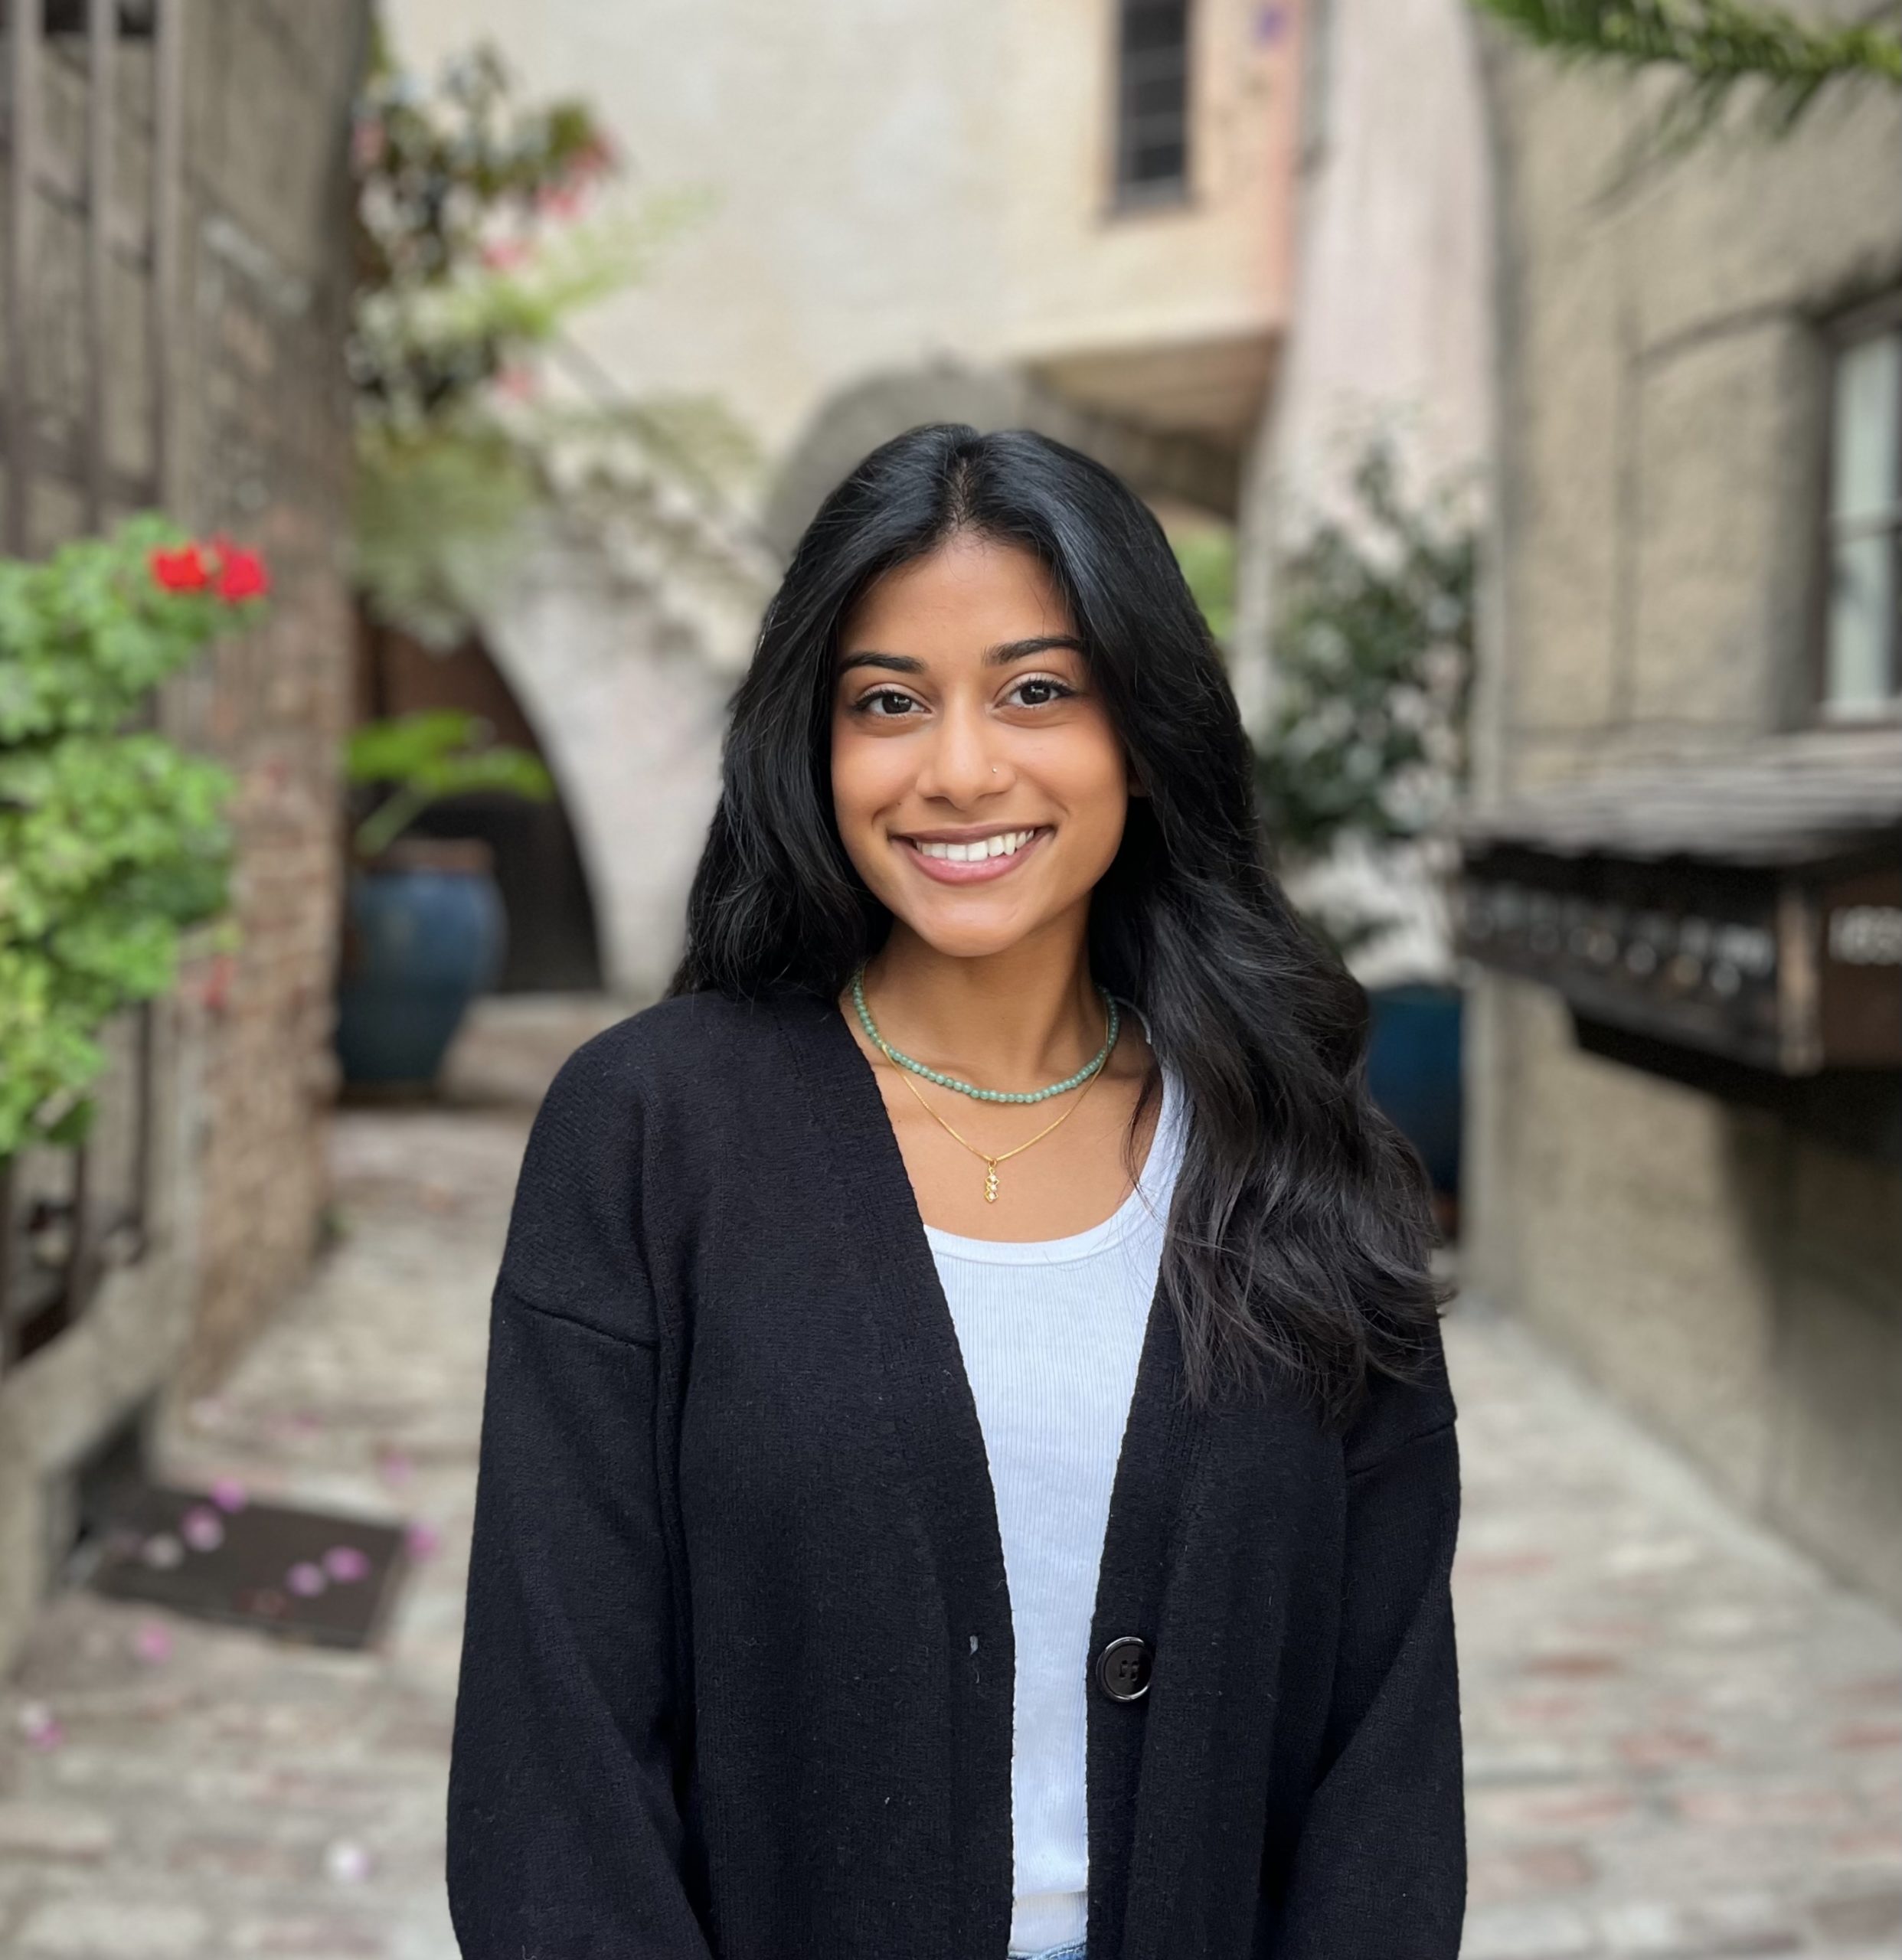 Bhavya Sukhavasi's headshot. Bhavya is standing in a cobbled alleyway between stone buildings. Smiling, Bhavya wears a white shirt and a black cardigan, with long black wavy hair.